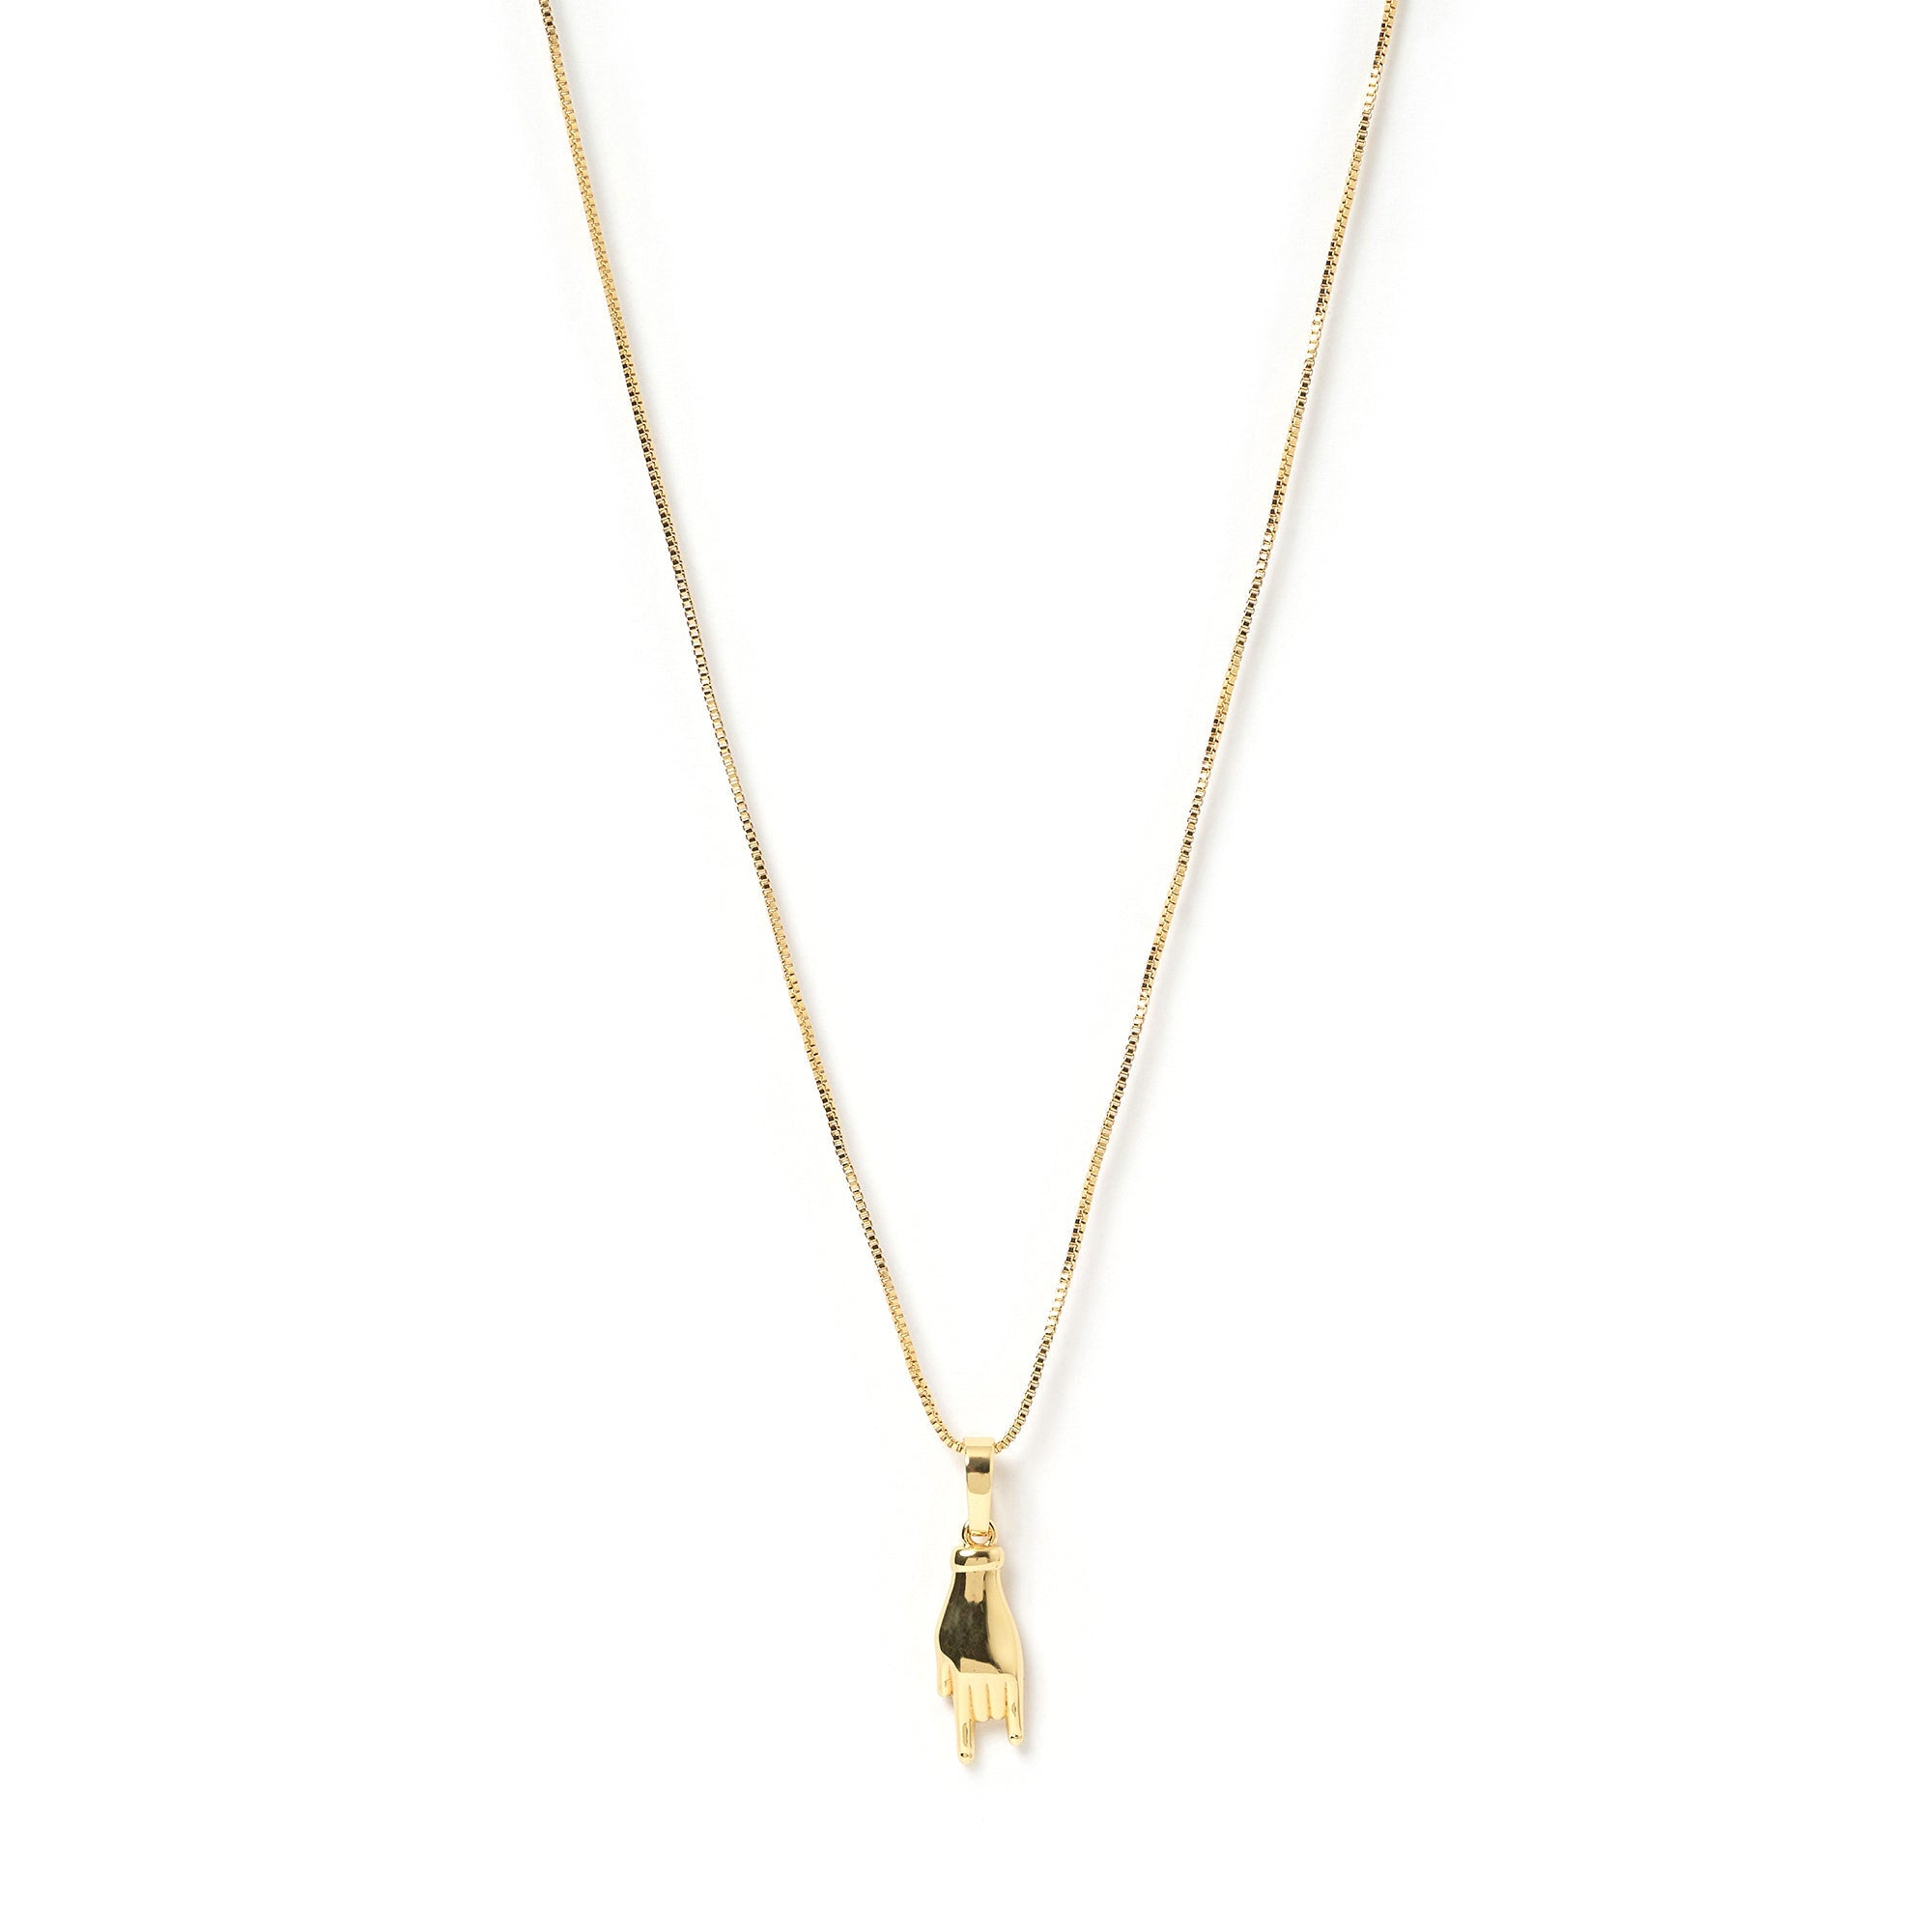 Mano Gold Charm Necklace